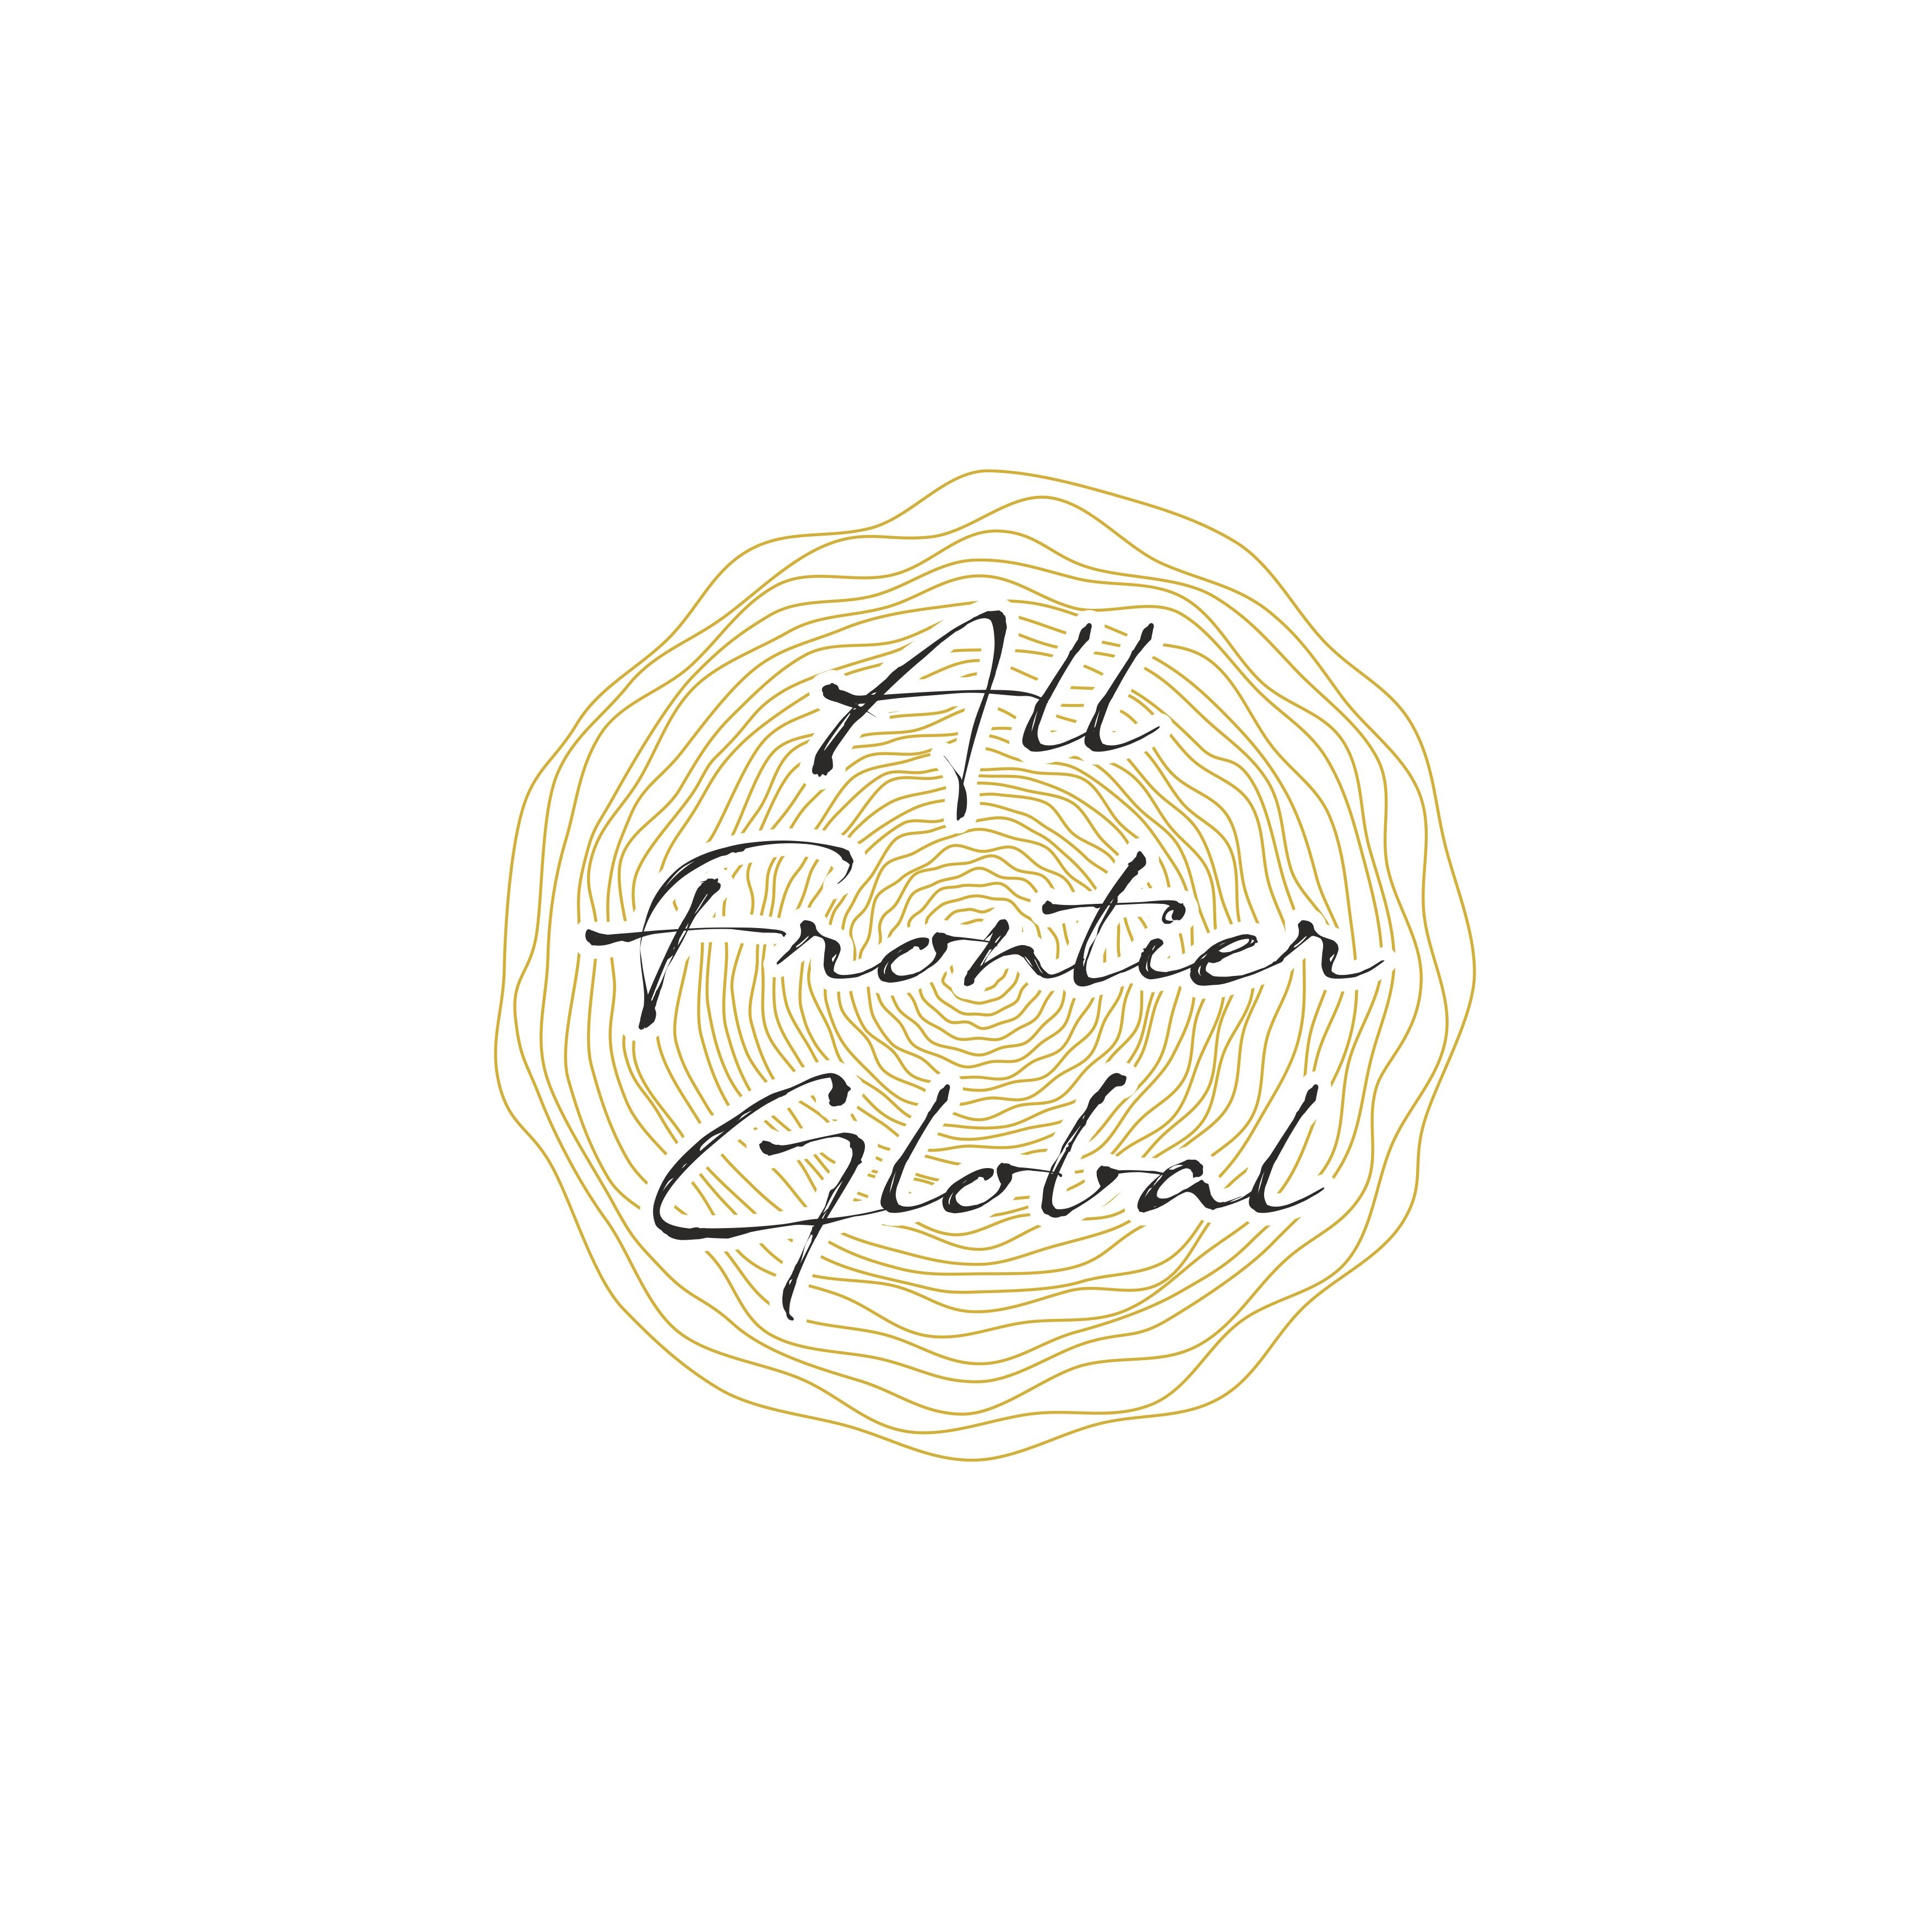 All Frontier (Health Fitness Nutrition) Global